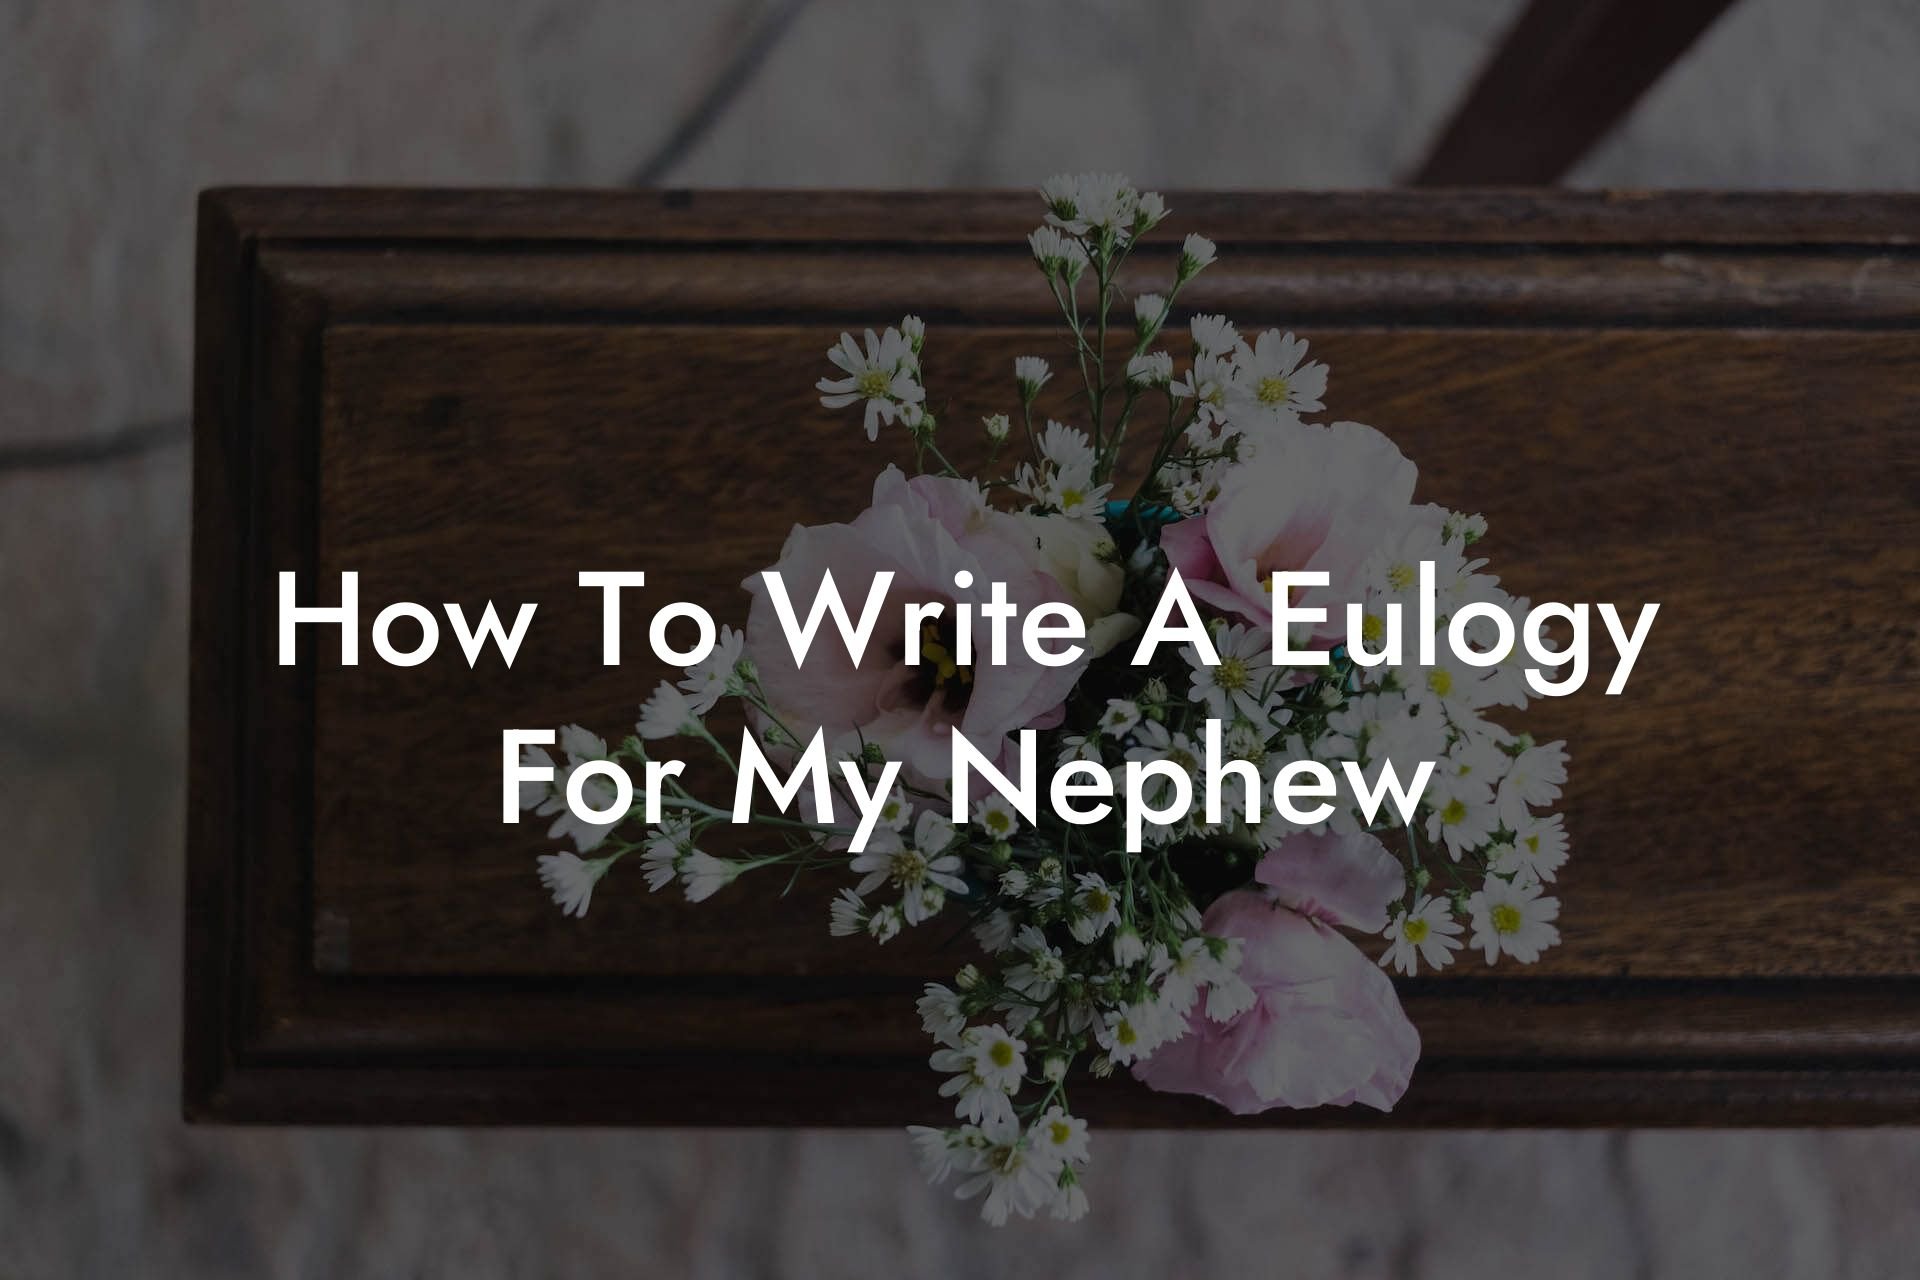 How To Write A Eulogy For My Nephew